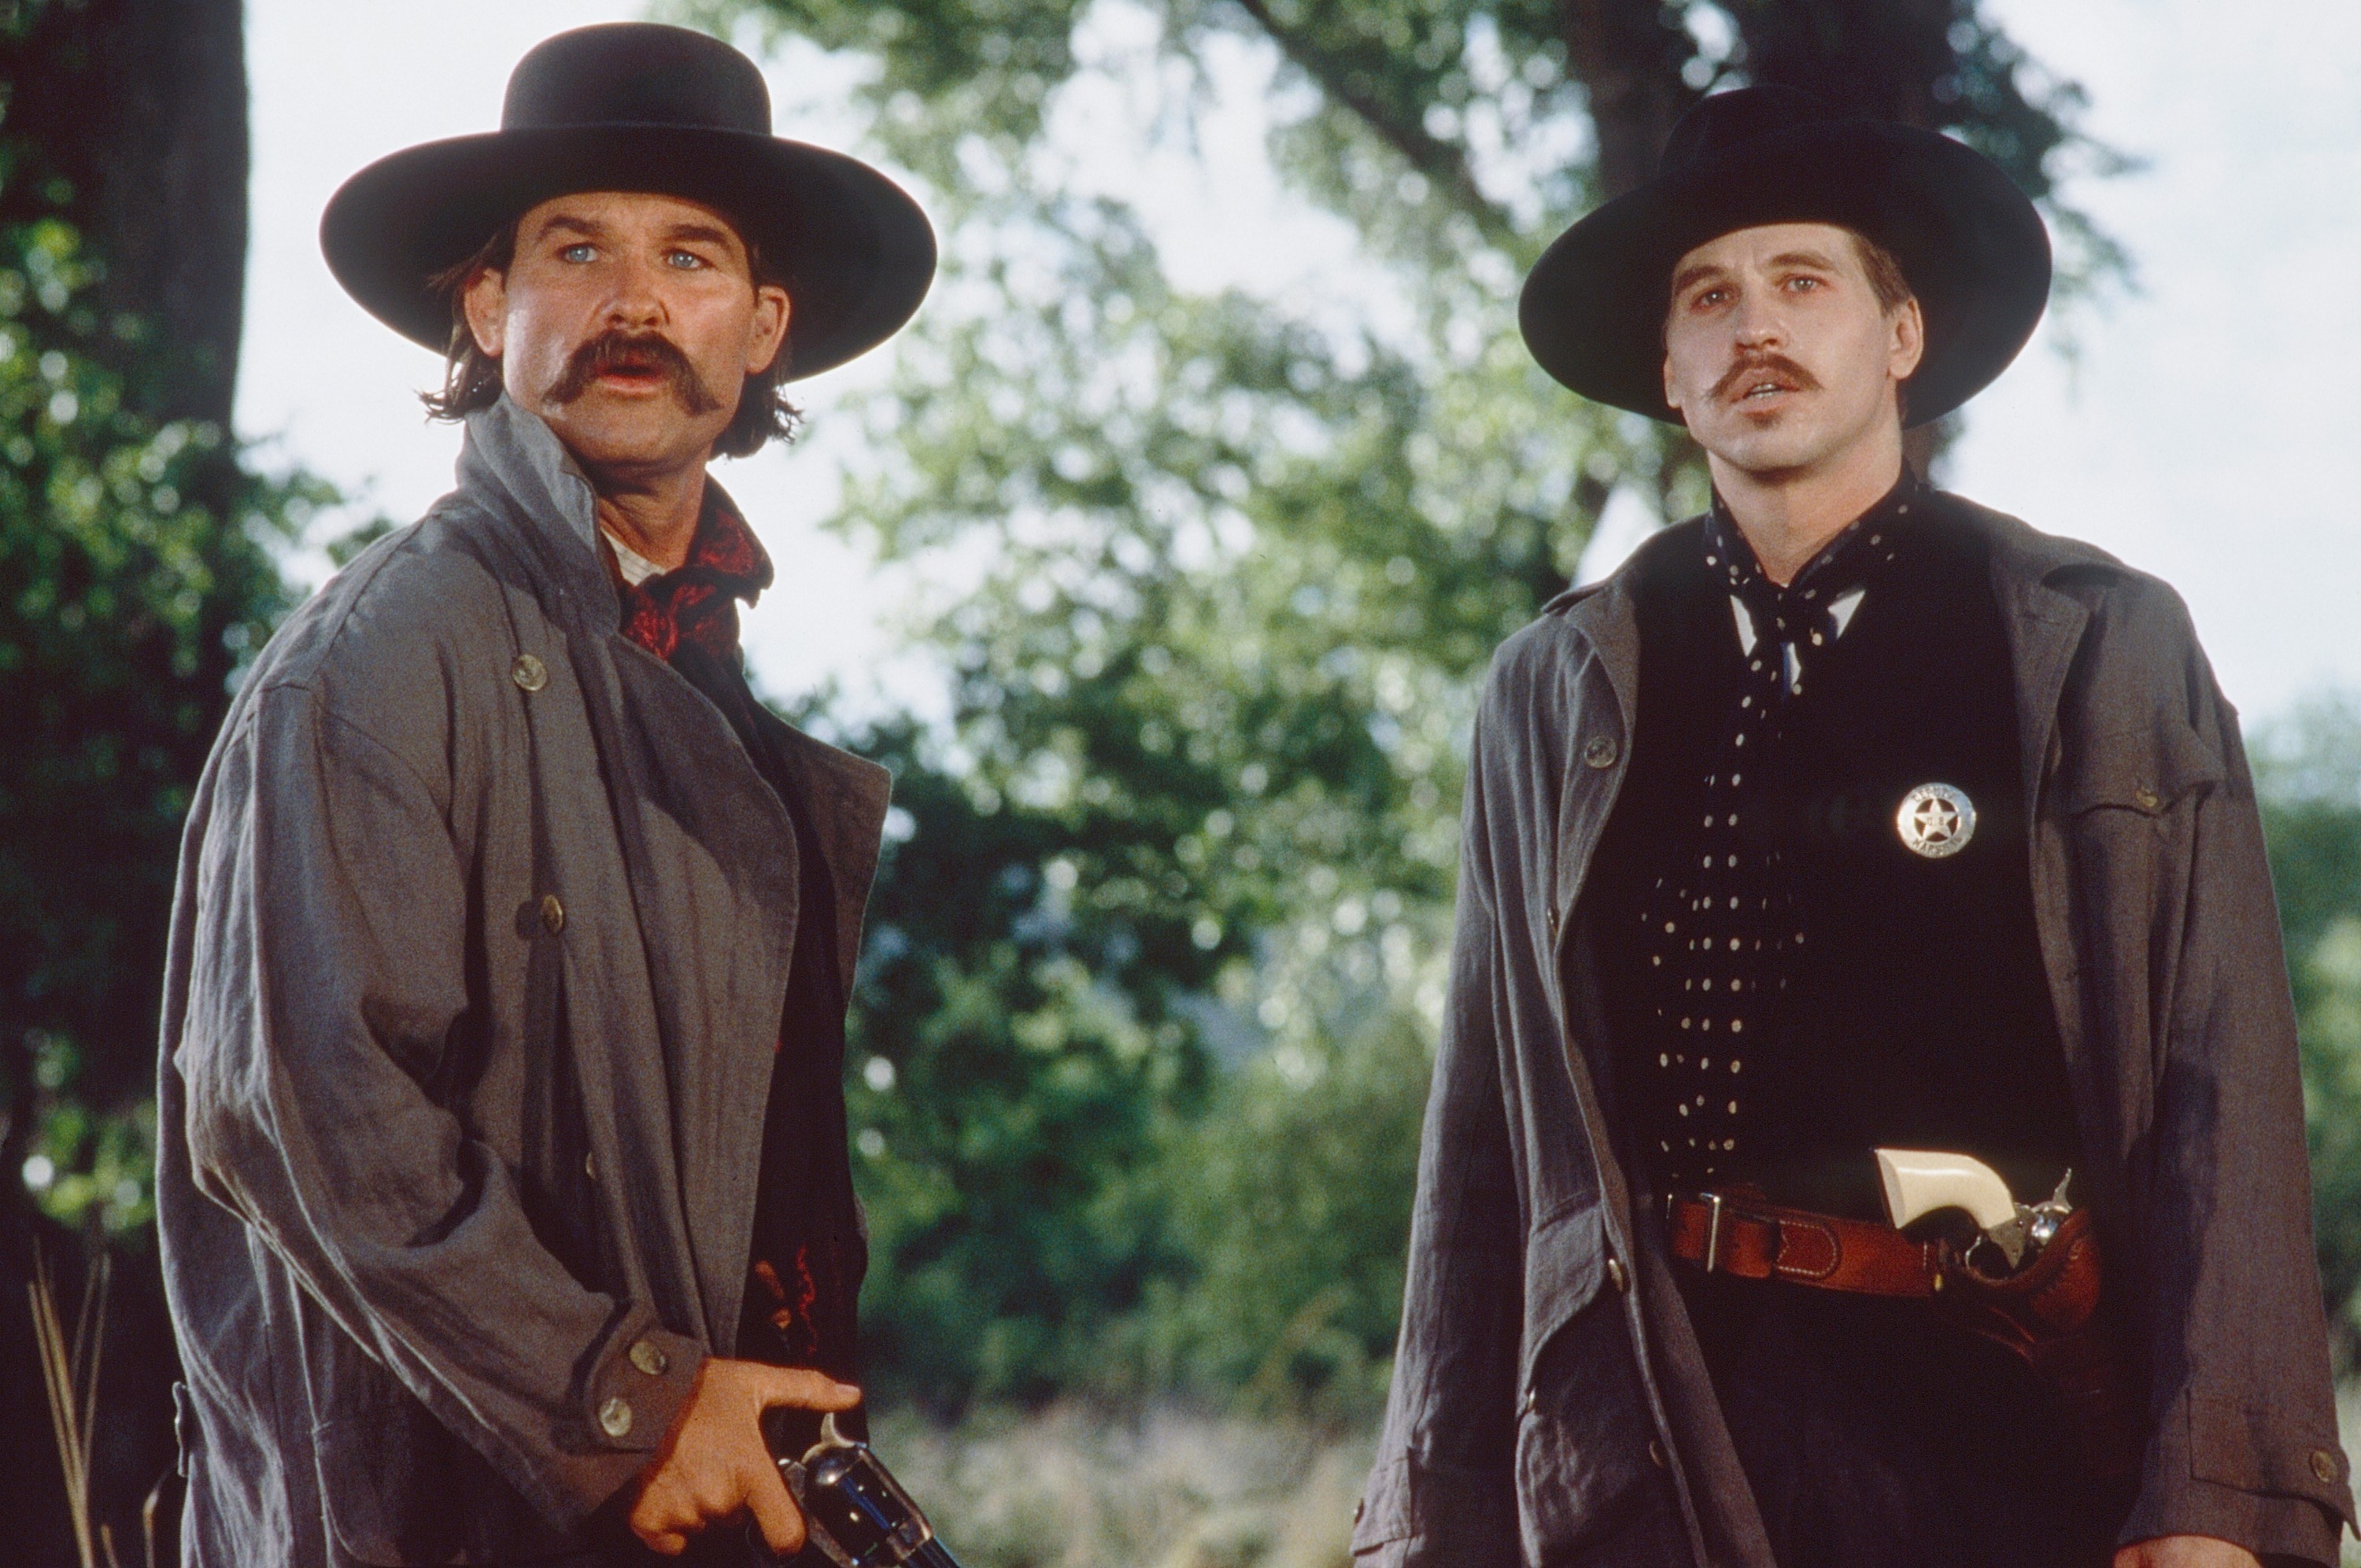 Wyatt Earp and Doc Holiday looking concerned, standing in a field